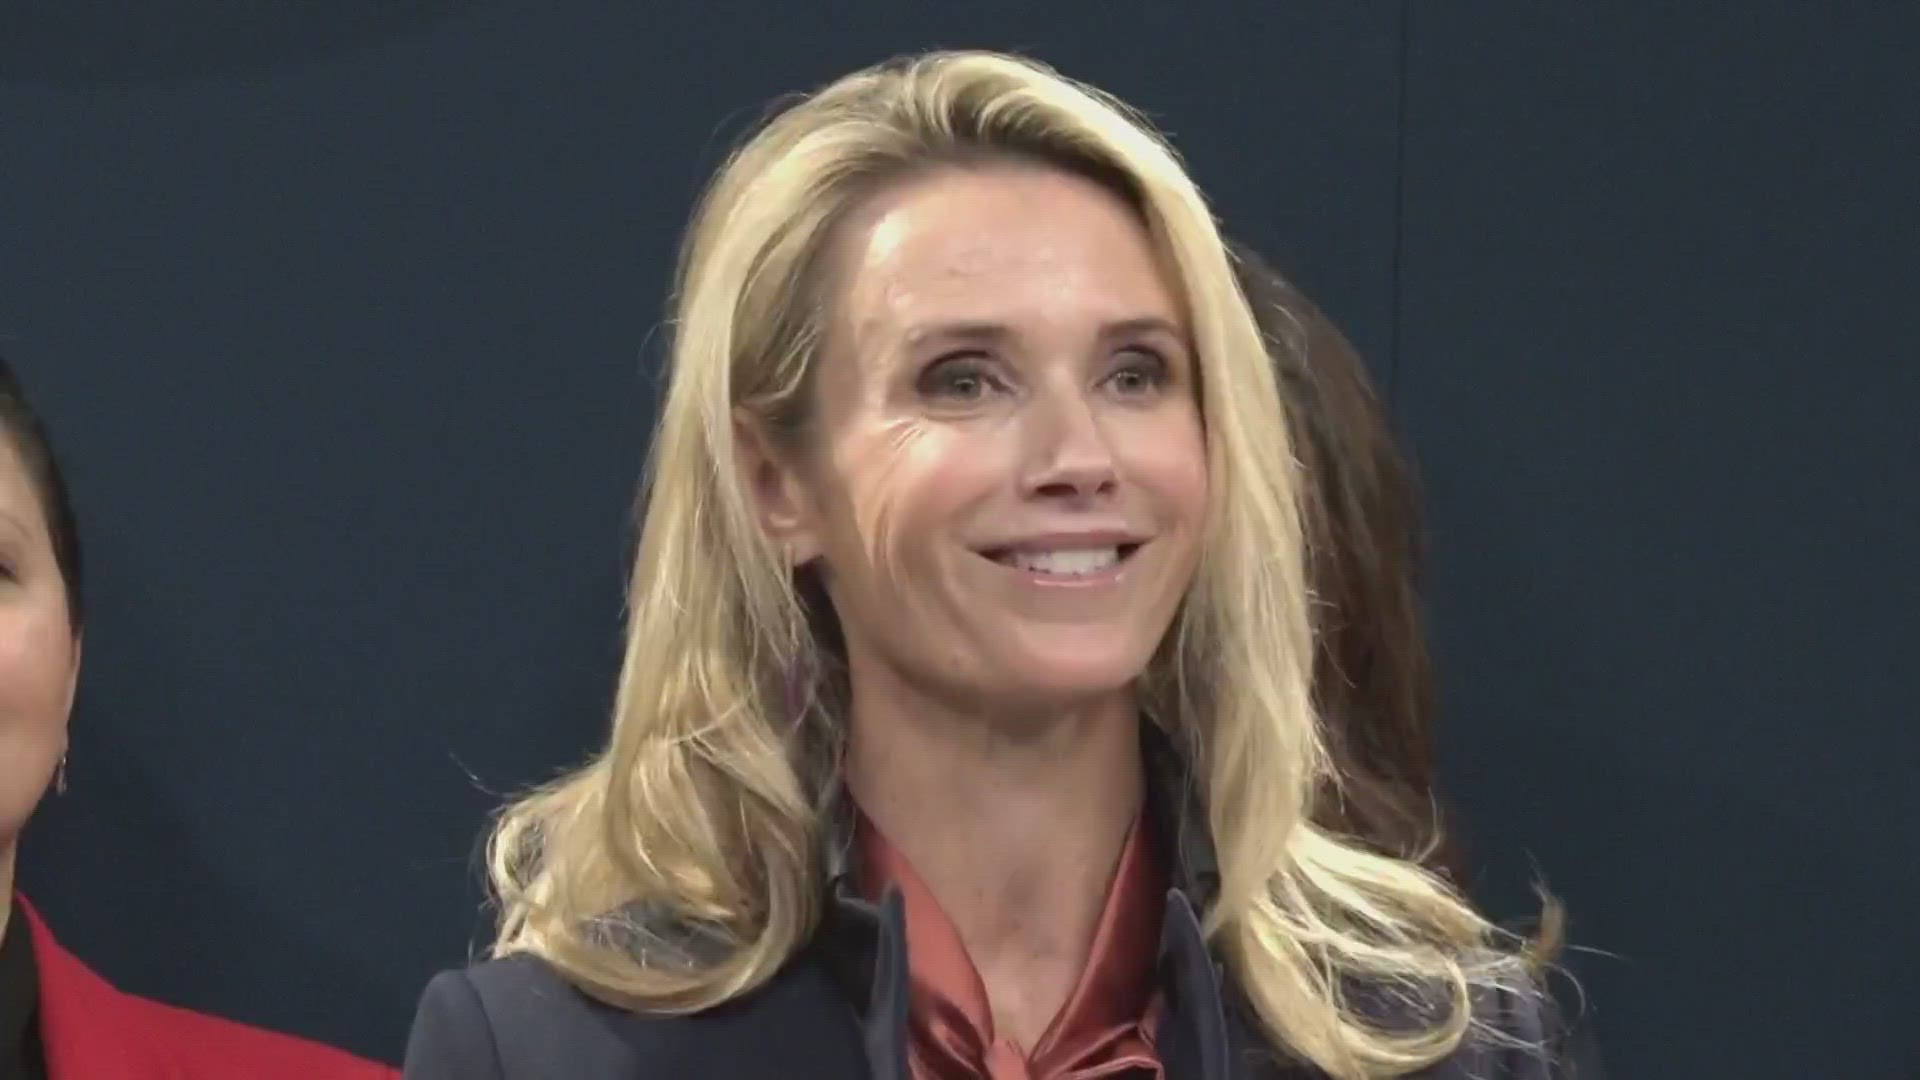 Siebel Newsom points out that California women lose about $87 billion dollars annually to the gender pay gap.